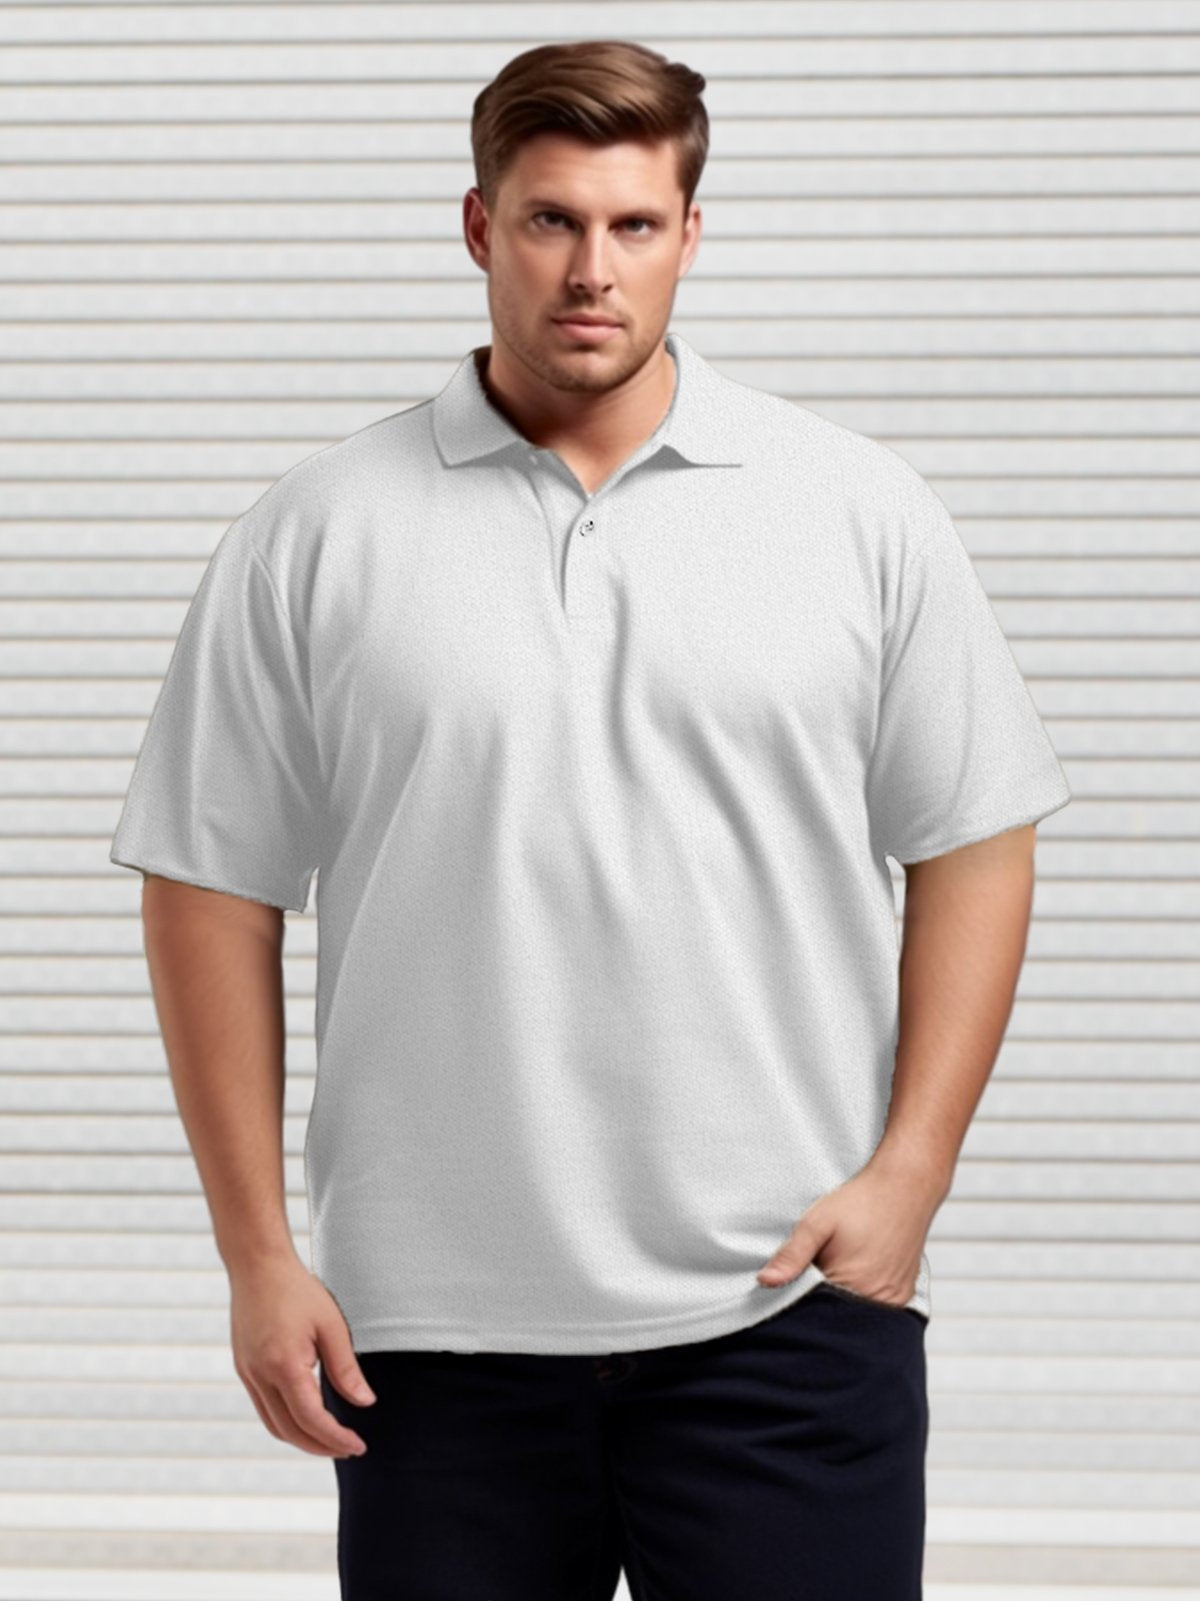 Big & Tall Casual Comfortable Quick Drying Men's Polo Shirts